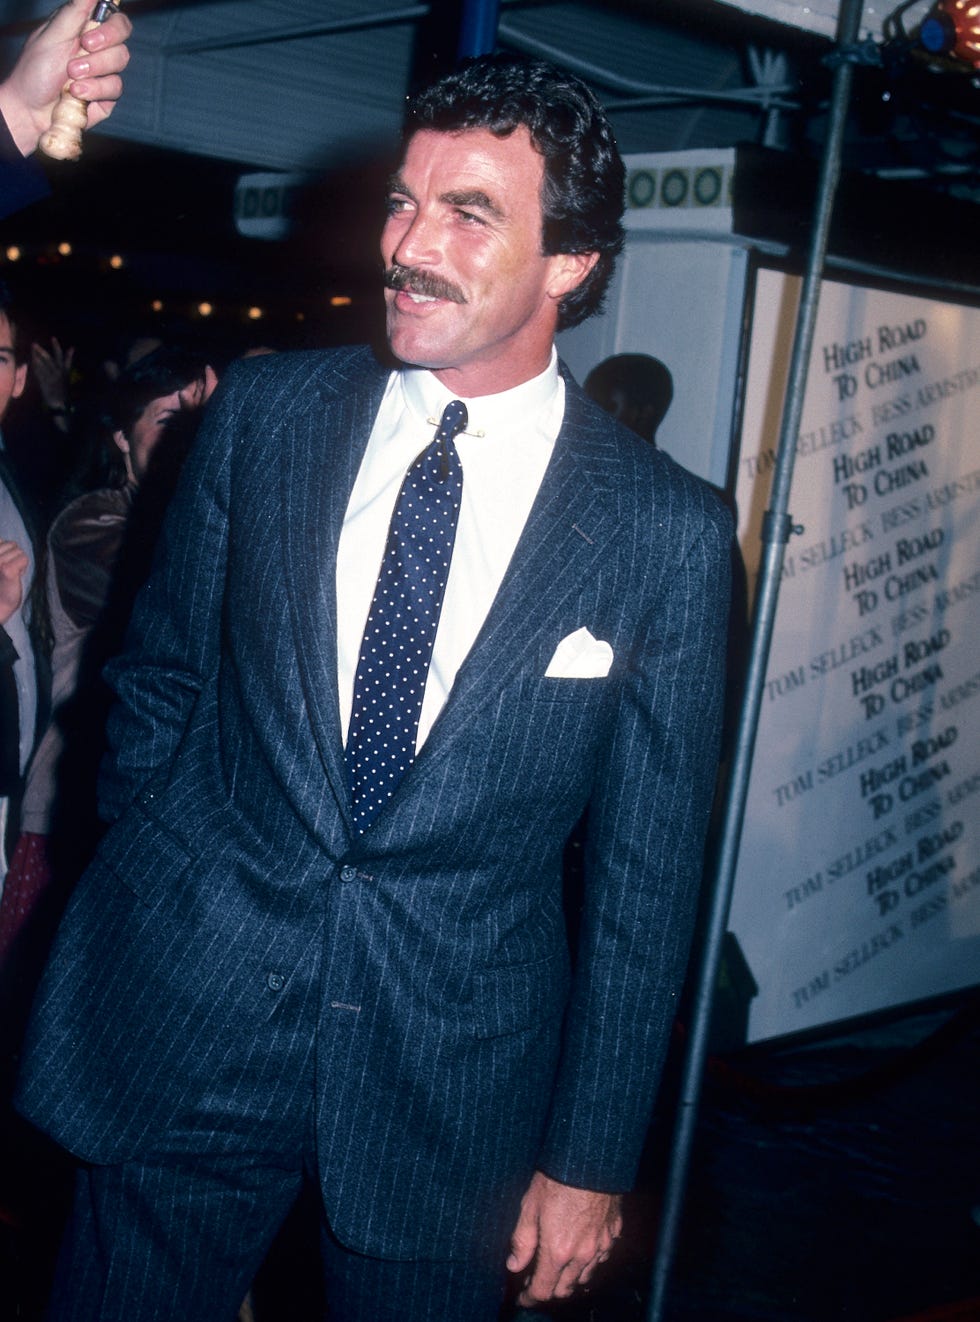 westwood, ca march 13 actor tom selleck attends the high road to china westwood premiere on march 13, 1983 at the mann village theatre in westwood, california photo by ron galellaron galella collection via getty images 